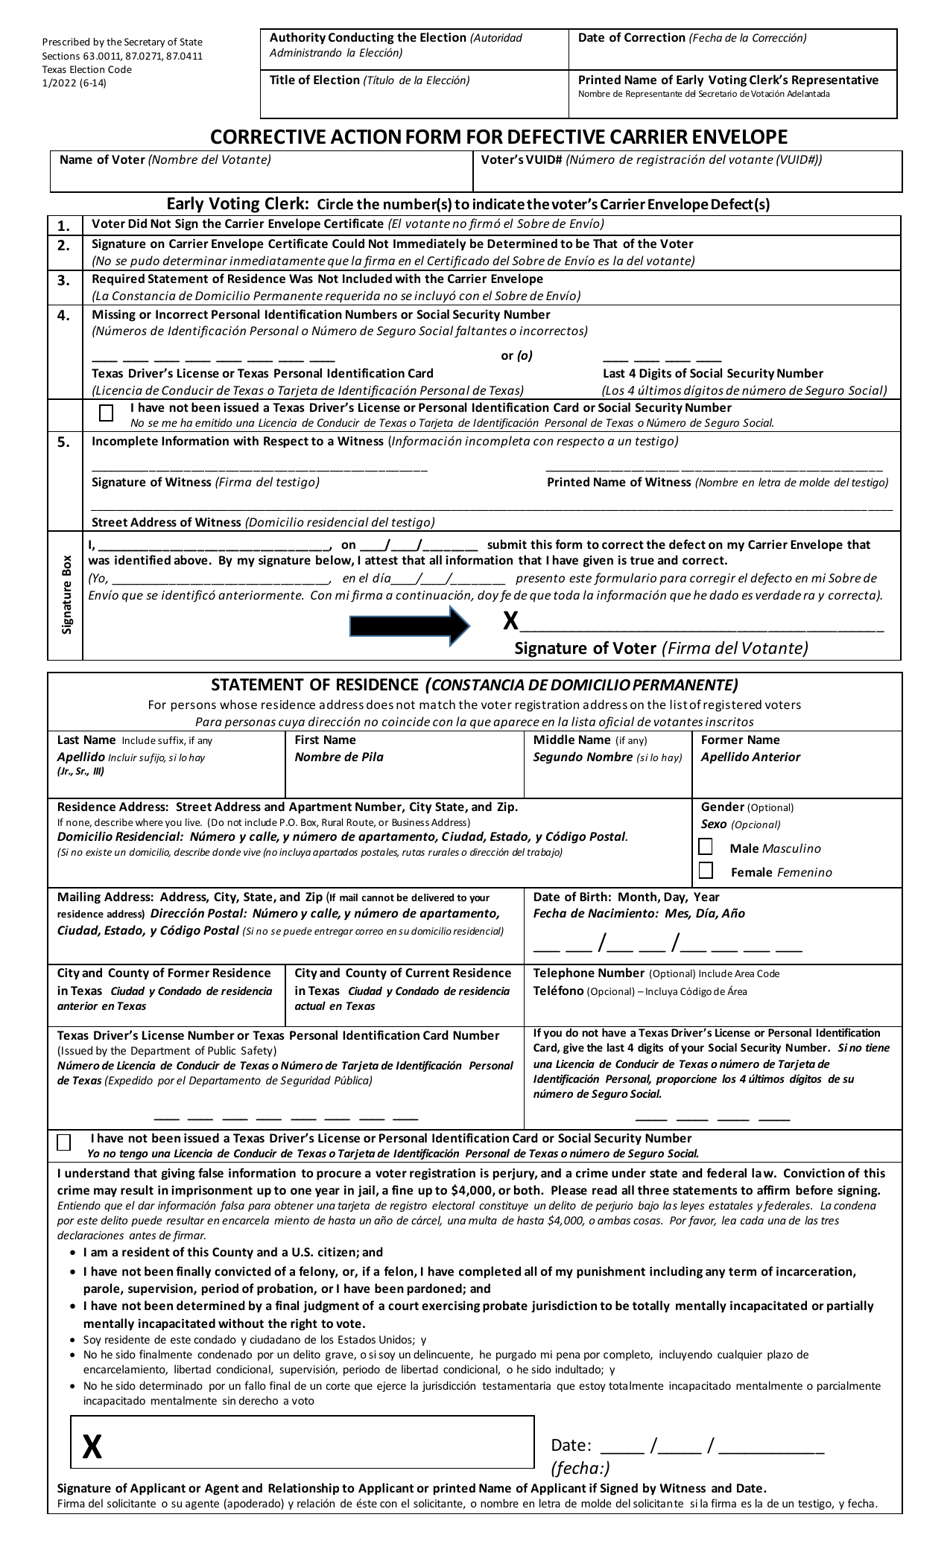 Form 6-14 Corrective Action Form for Defective Carrier Envelope - Texas (English/Spanish), Page 1